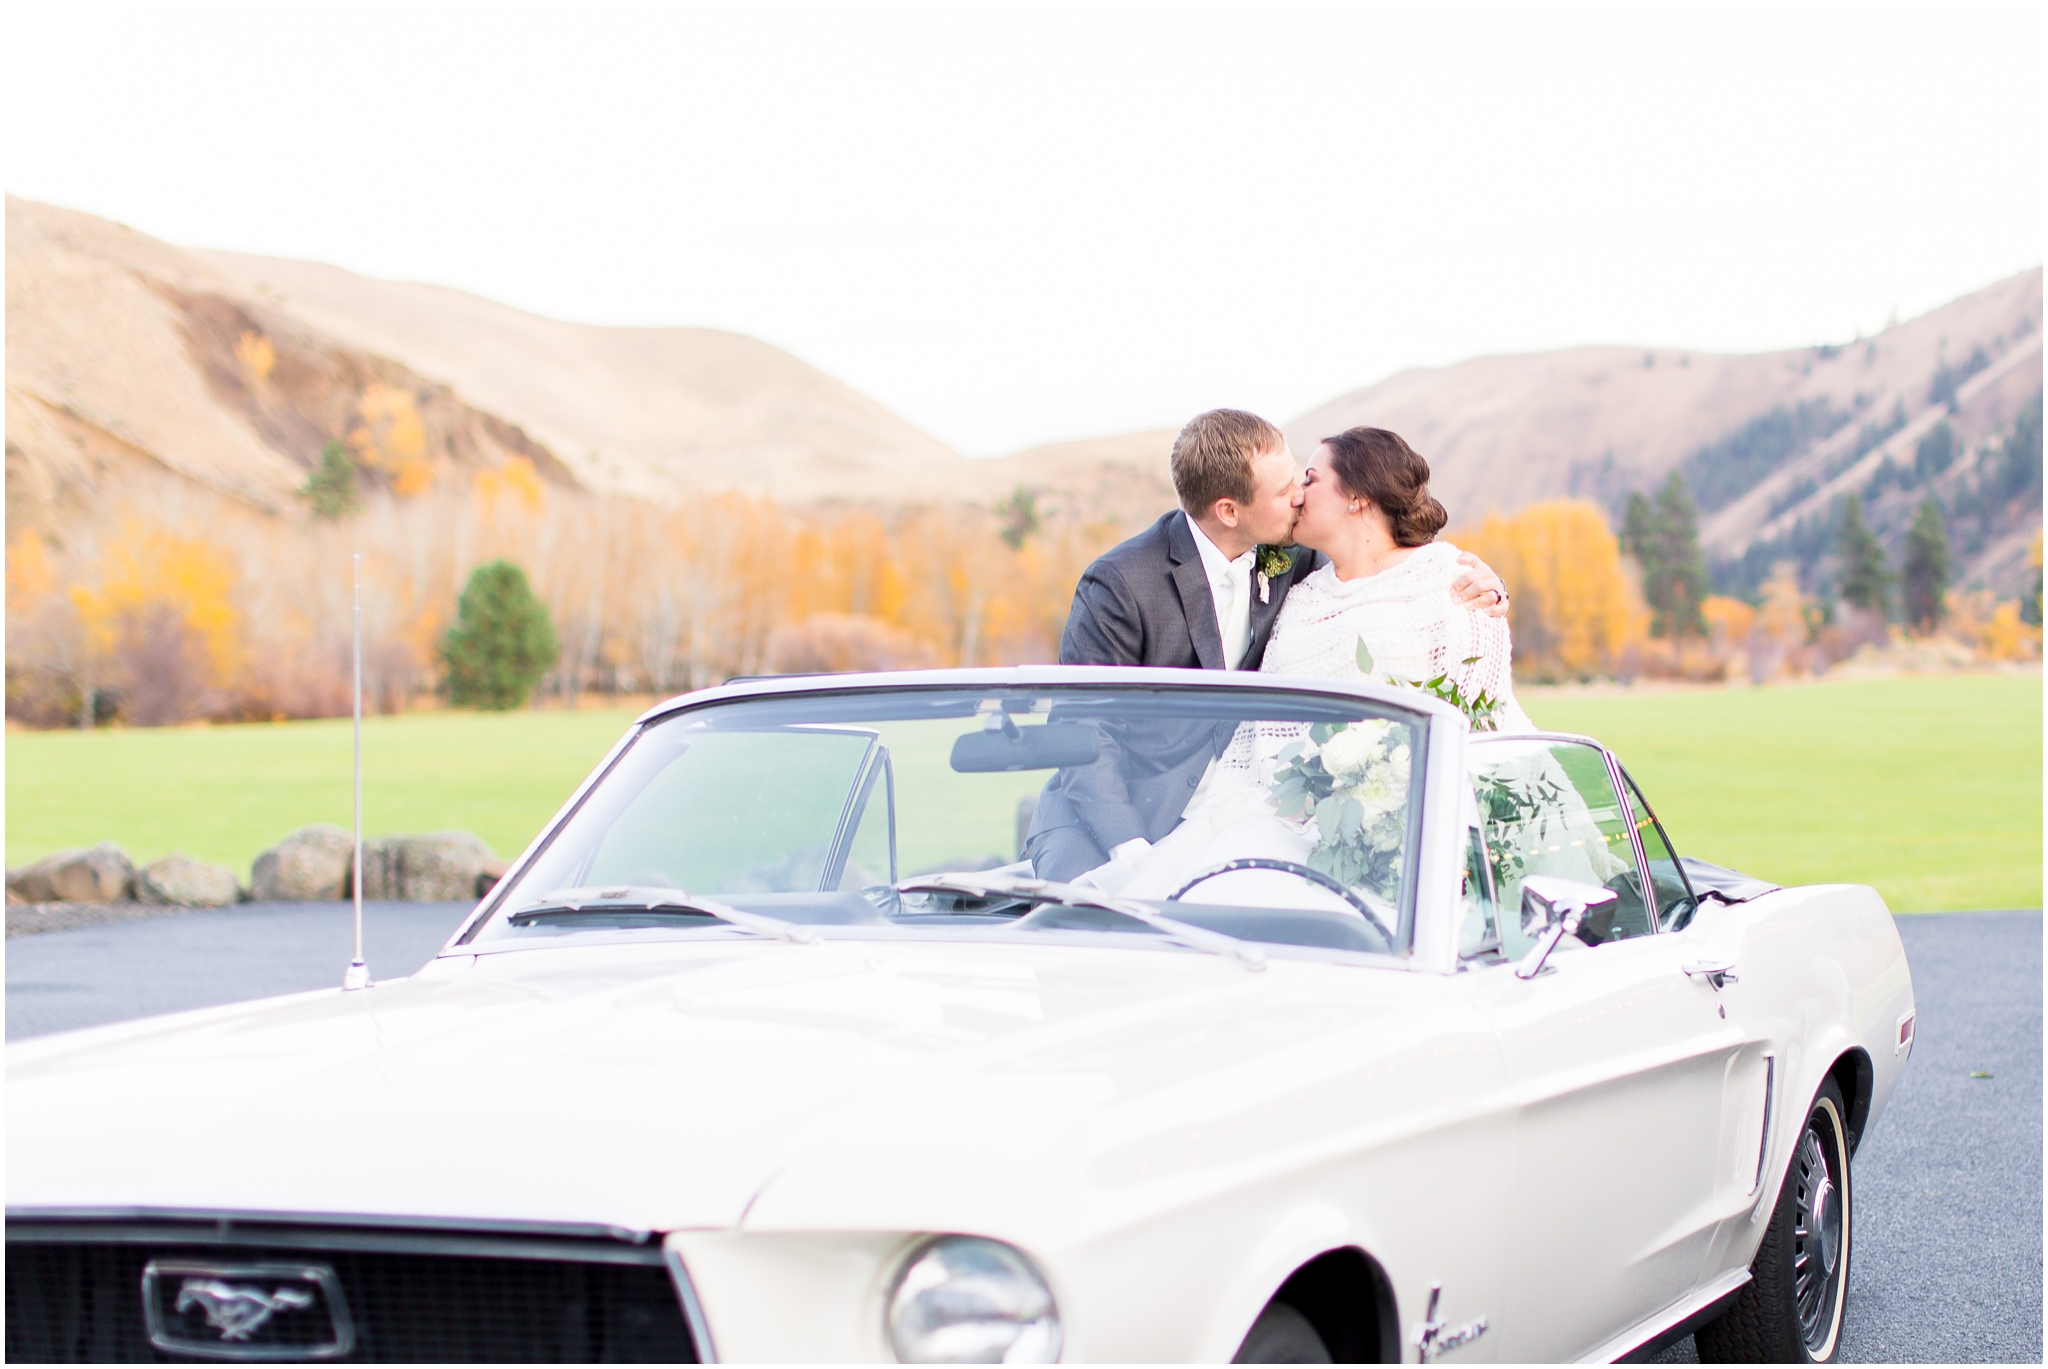 This American Homestead wedding was a Yakima wedding captured by Spokane wedding photographer Taylor Rose Photography at one of the best Yakima wedding venues, the American Homestead. Taylor Rose Photography is a Northern Virginia Wedding photographer and DC wedding photographer capturing weddings, engagement sessions and anniversaries across the U.S. and beyond. Including vintage getaway car - Mustang.